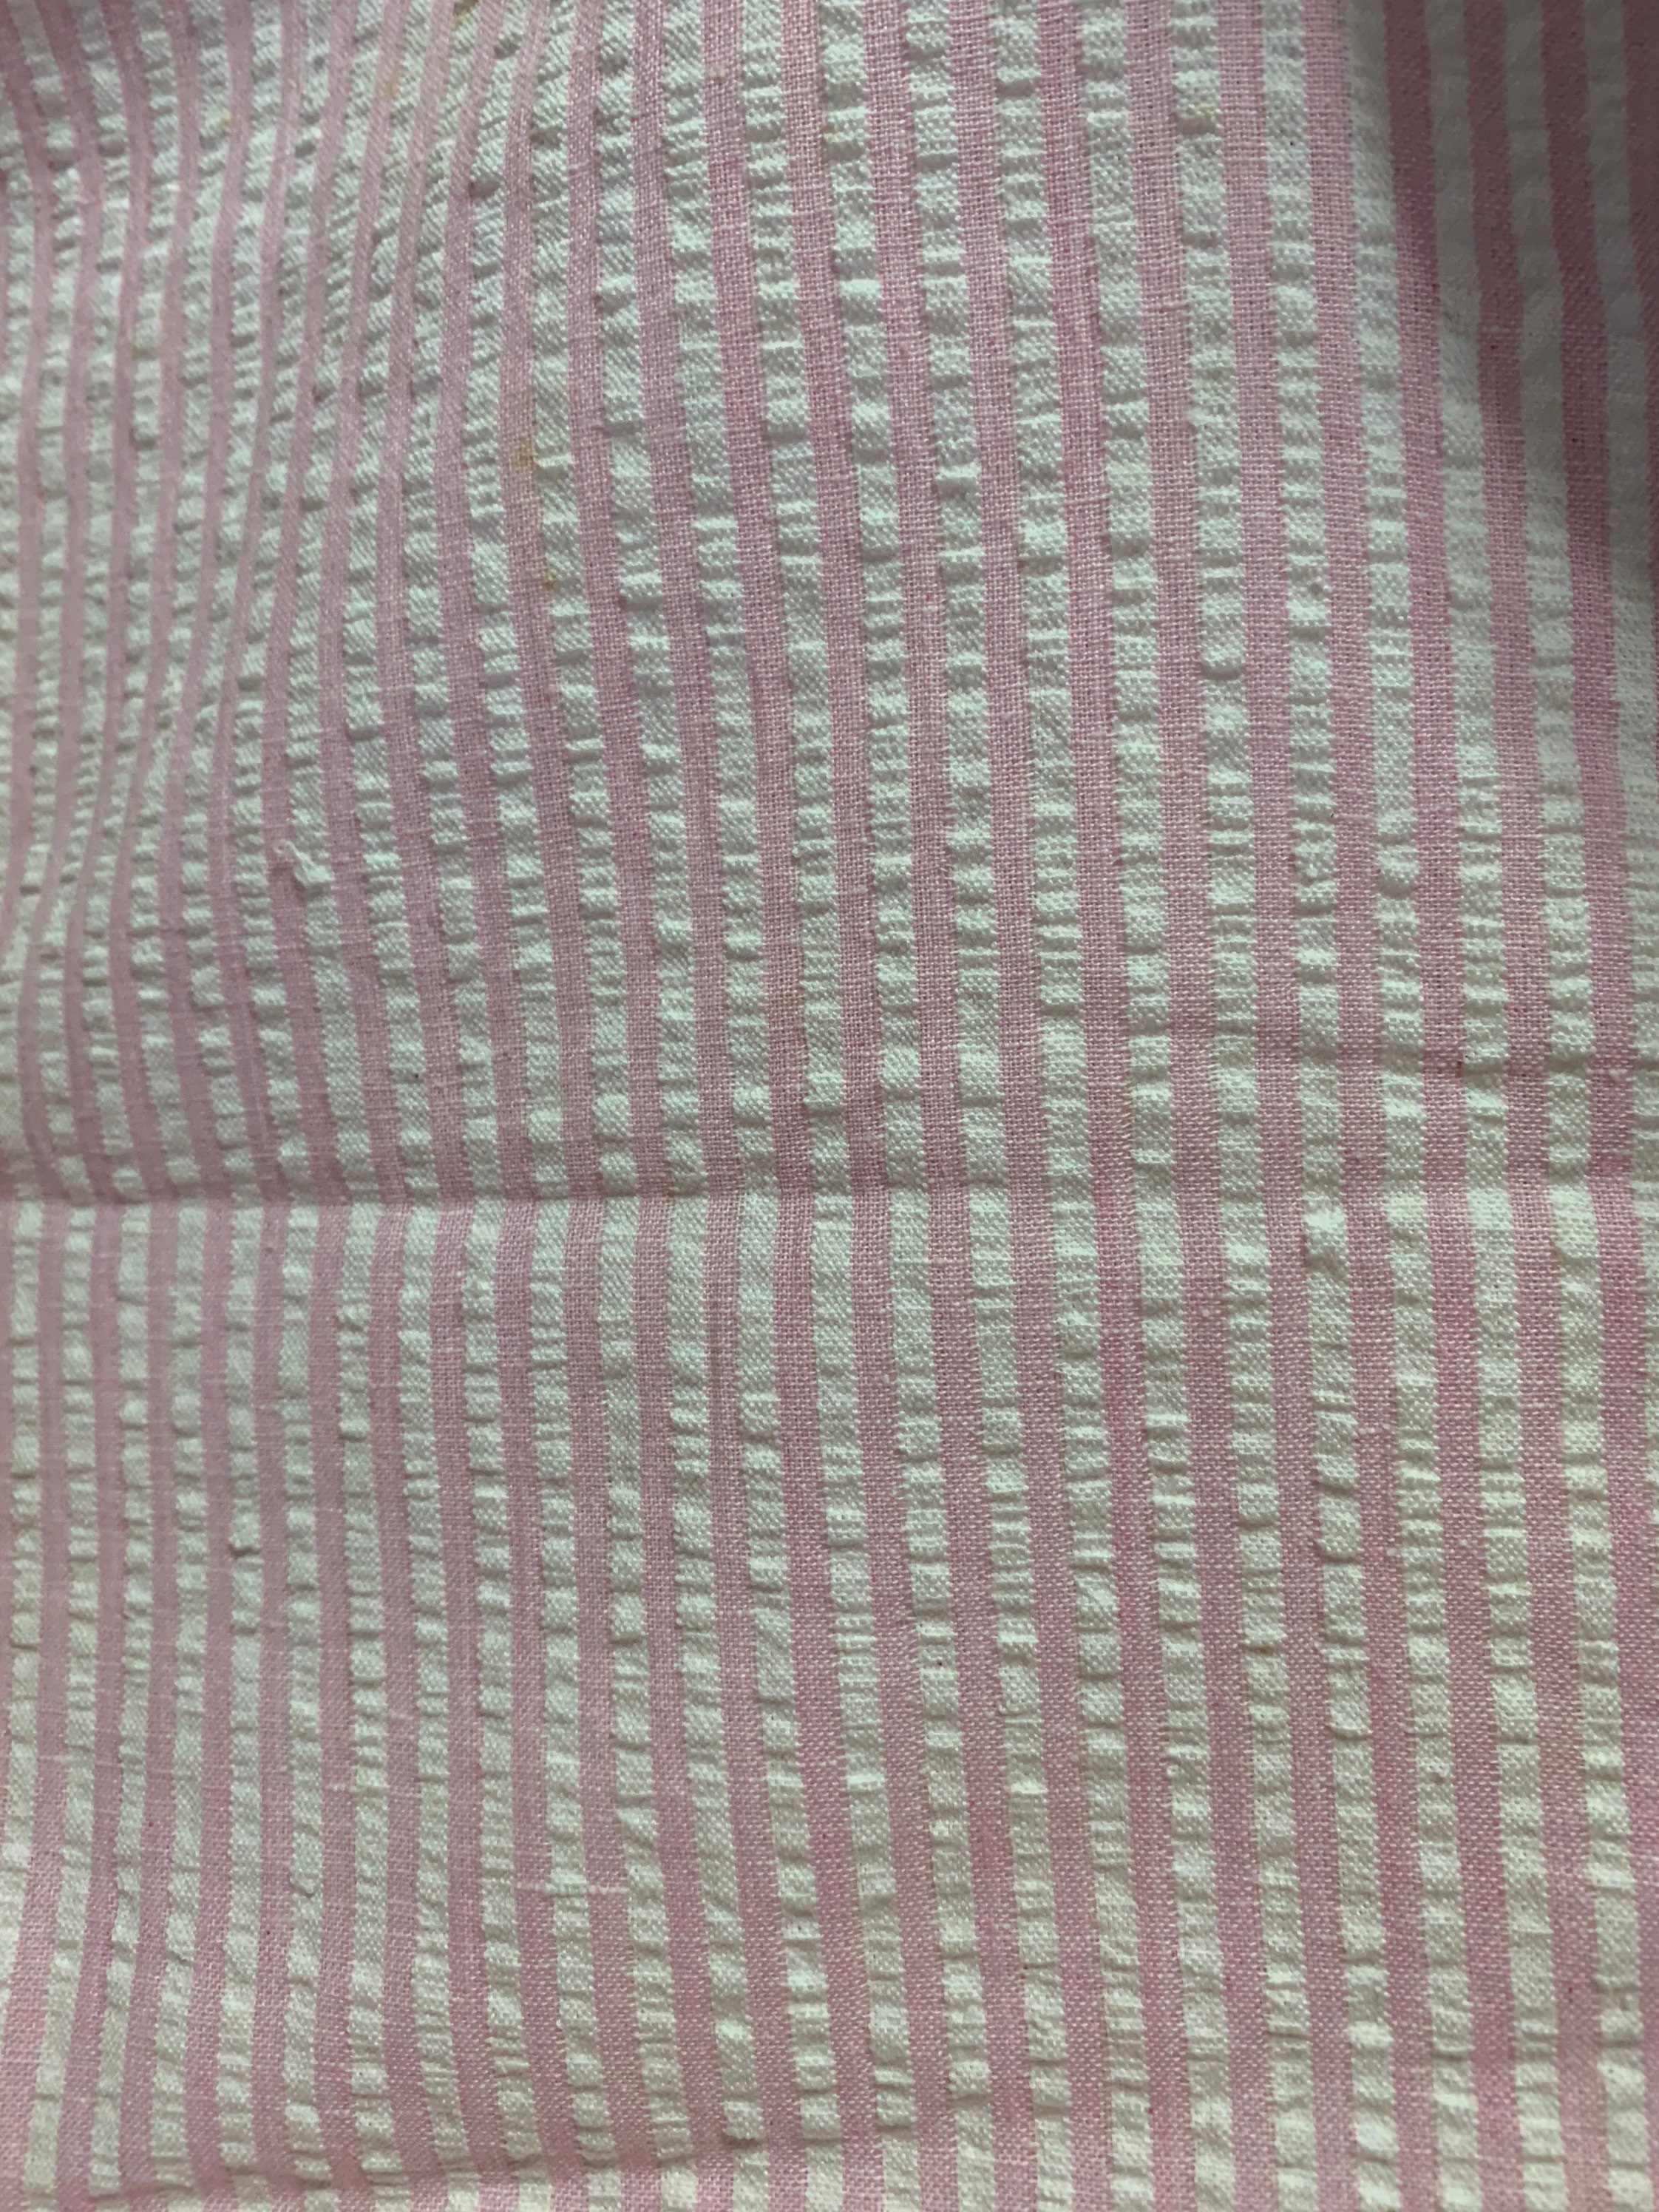 Vintage 1980s Pink and White Seersucker Striped Fabric 1.5 - Etsy